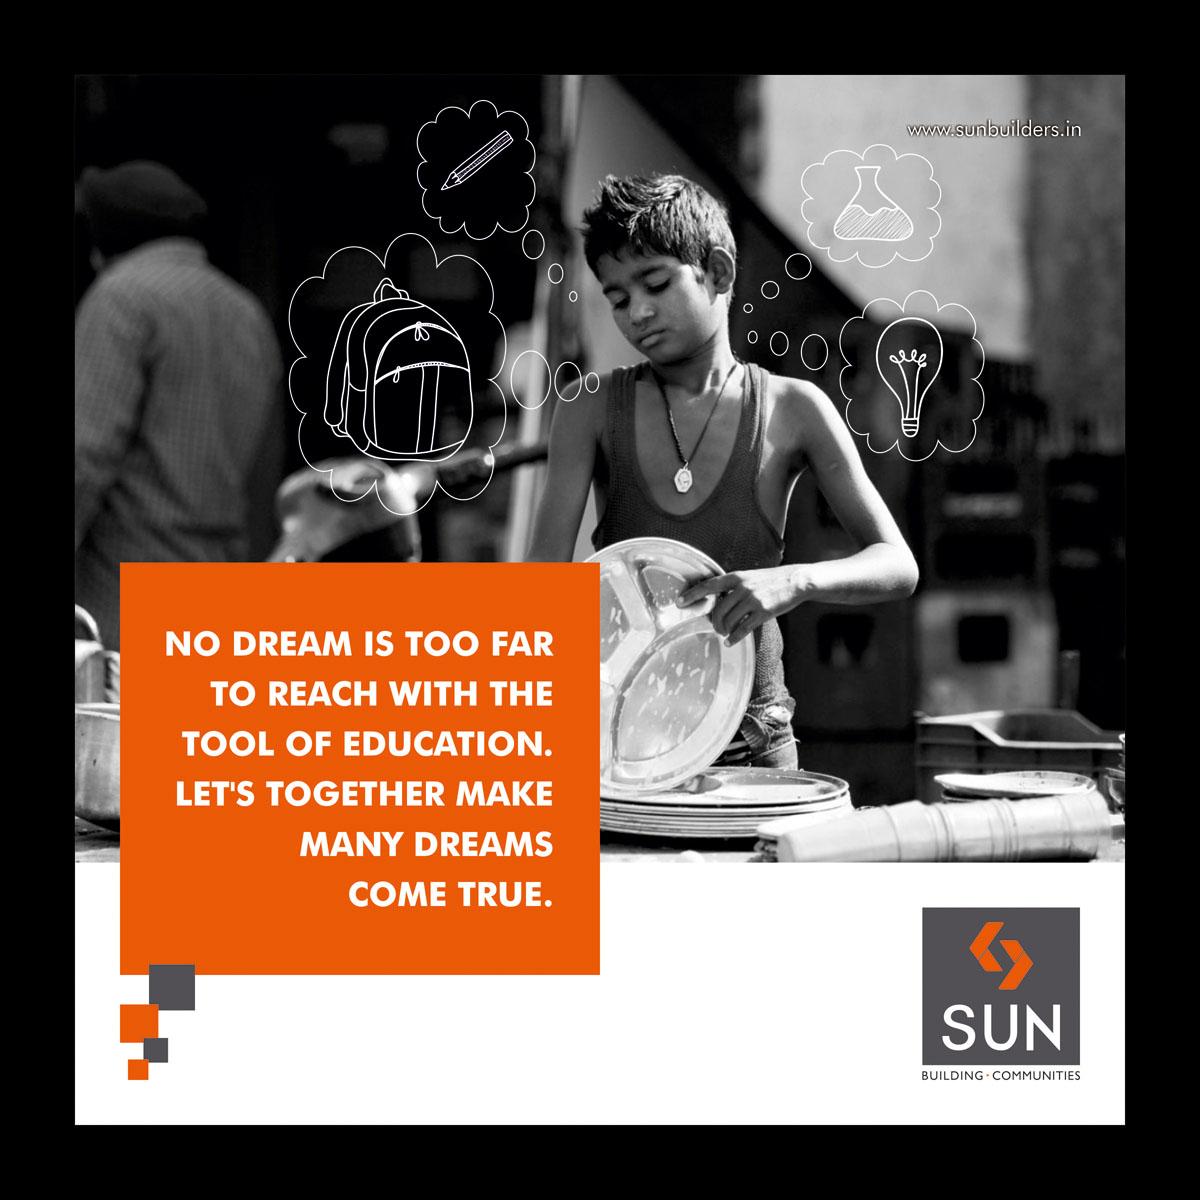 A dream nurtured is dream fulfilled. Let’s stop child labour and help them realize their dreams with education. http://t.co/MrjvVPb0NG